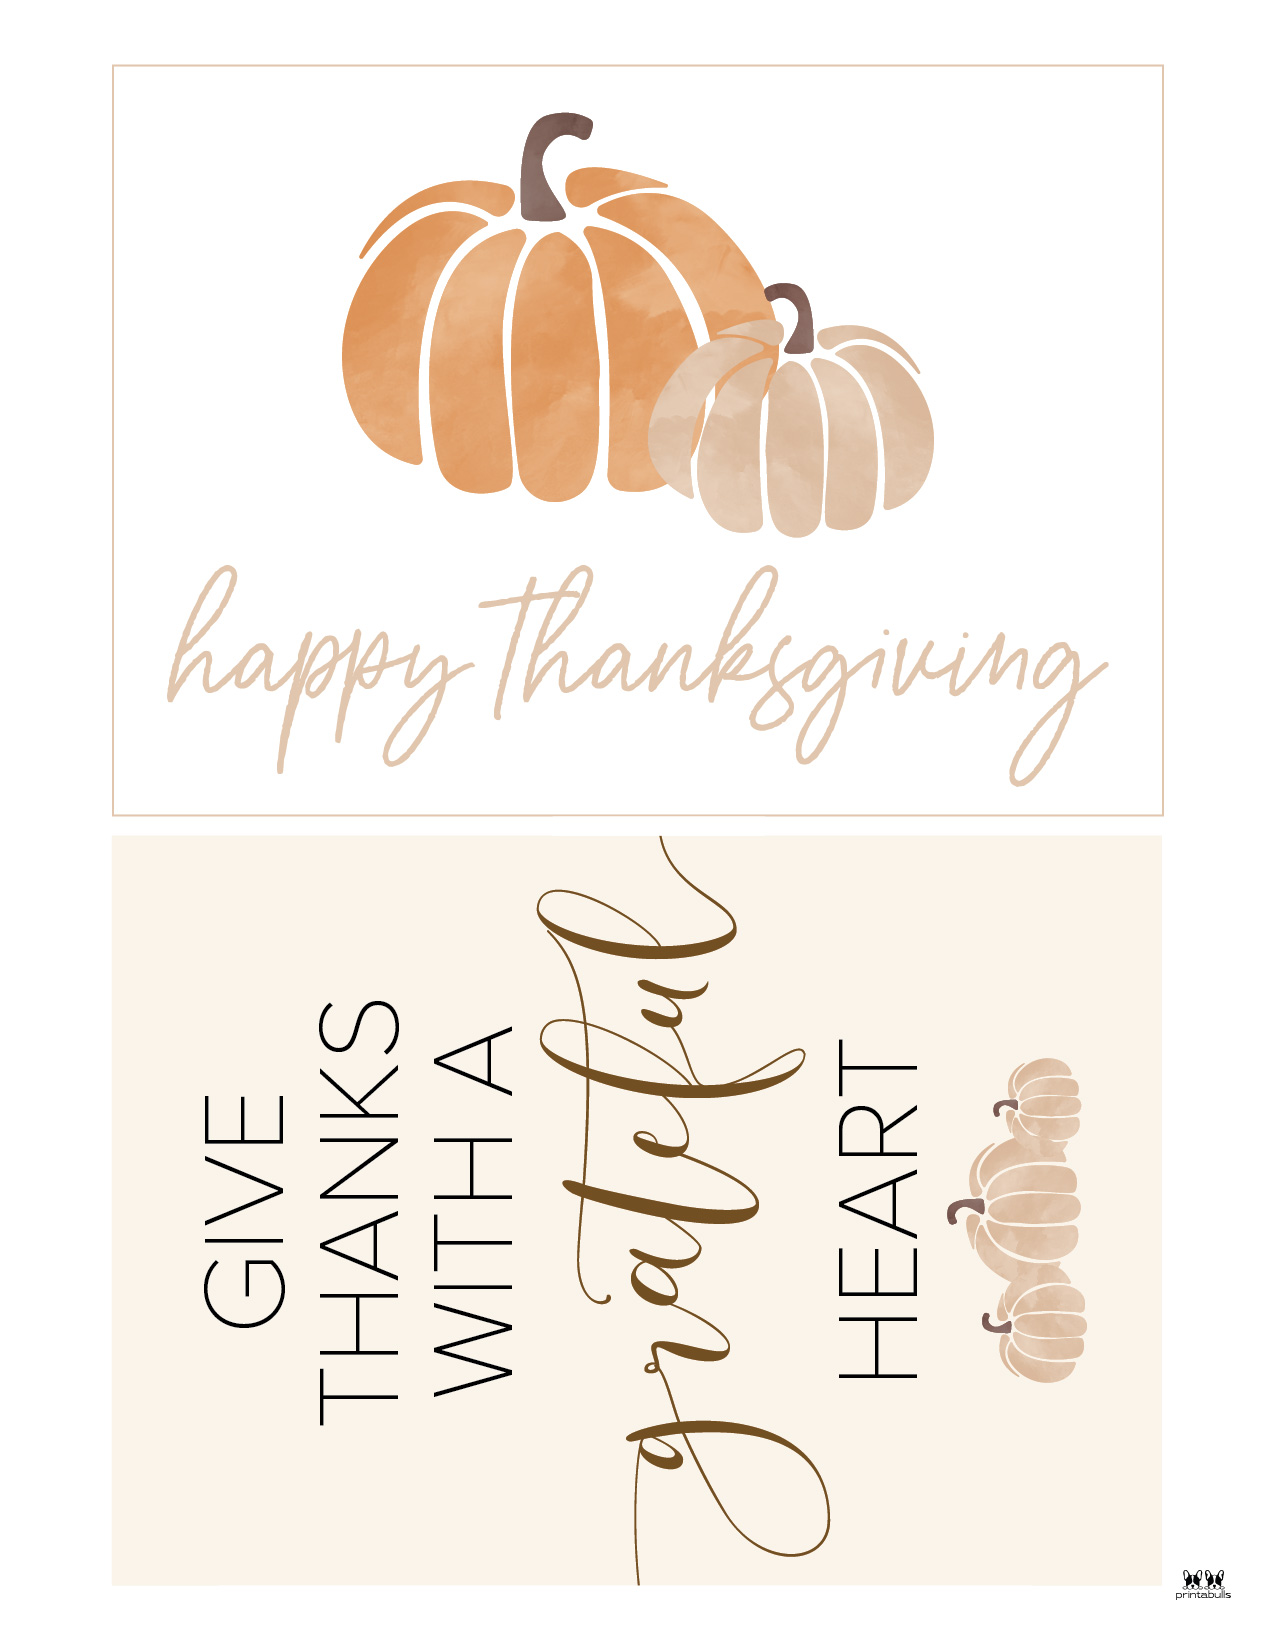 Free Printable Thanksgiving Cards To Color Pdf